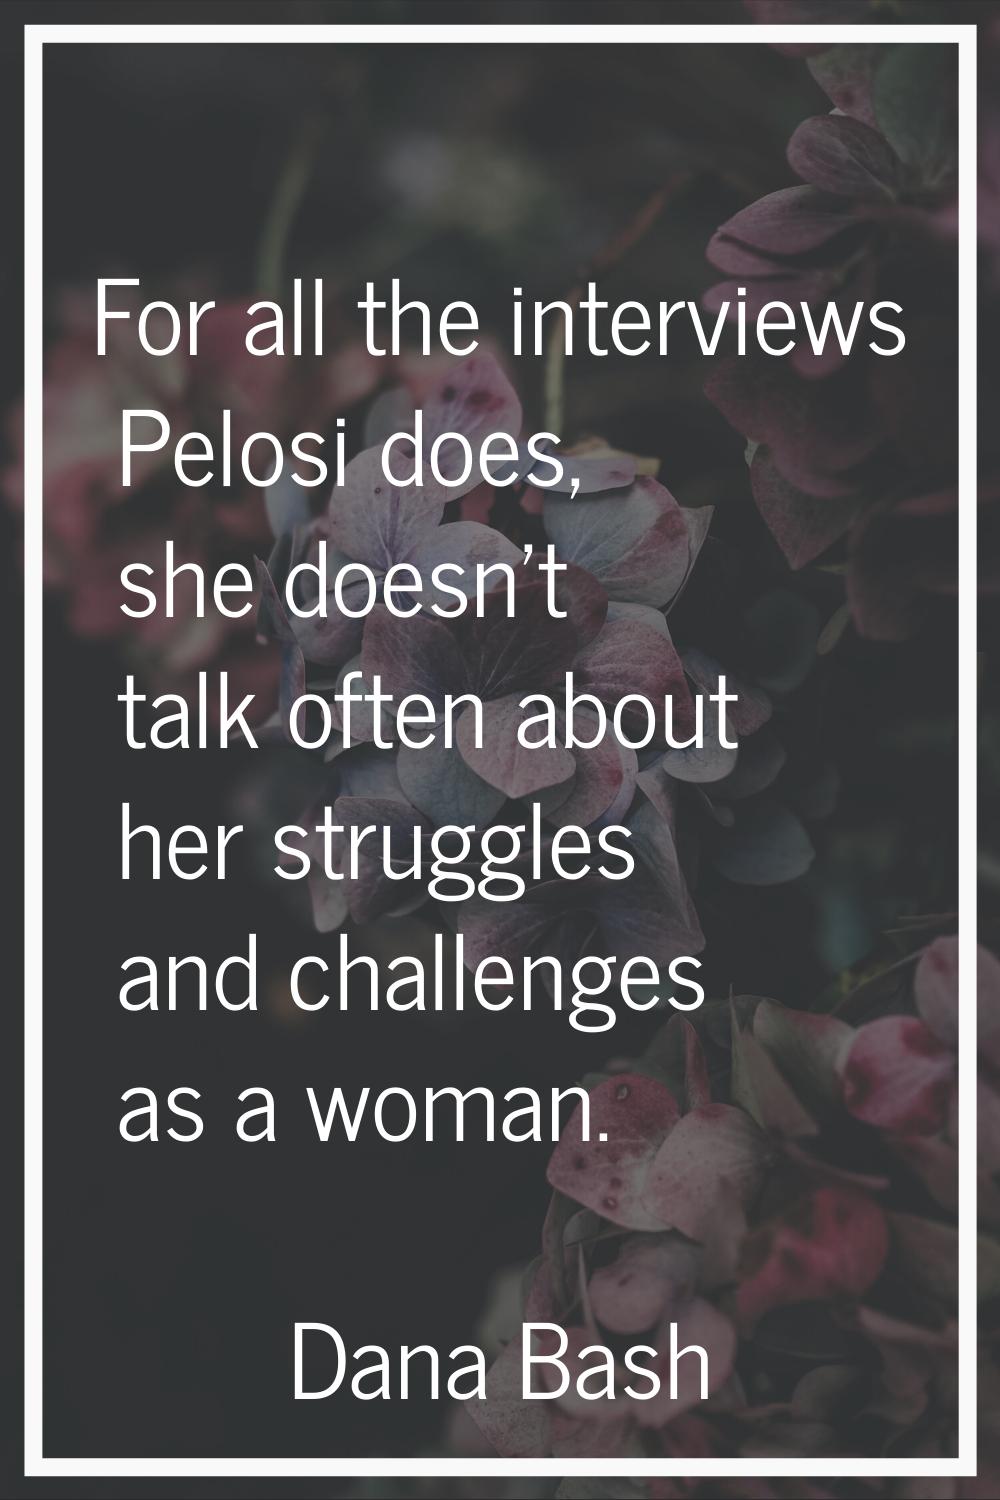 For all the interviews Pelosi does, she doesn't talk often about her struggles and challenges as a 